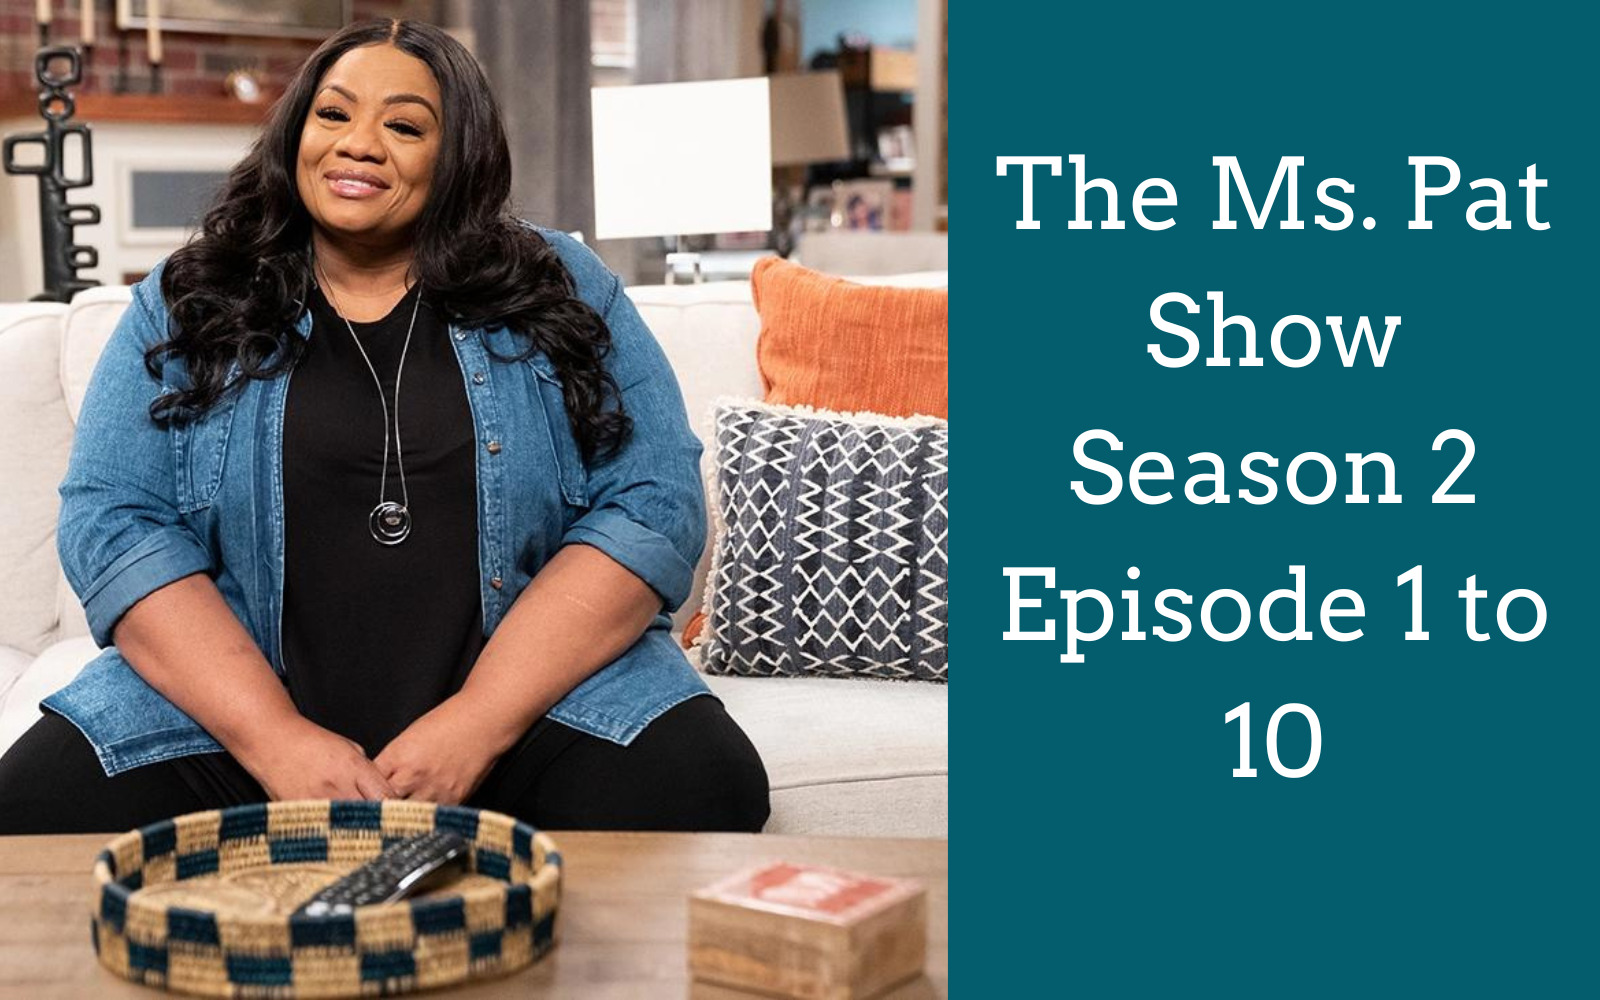 The studio has decided to renew this series and The Ms. Pat Show Season 2 E...